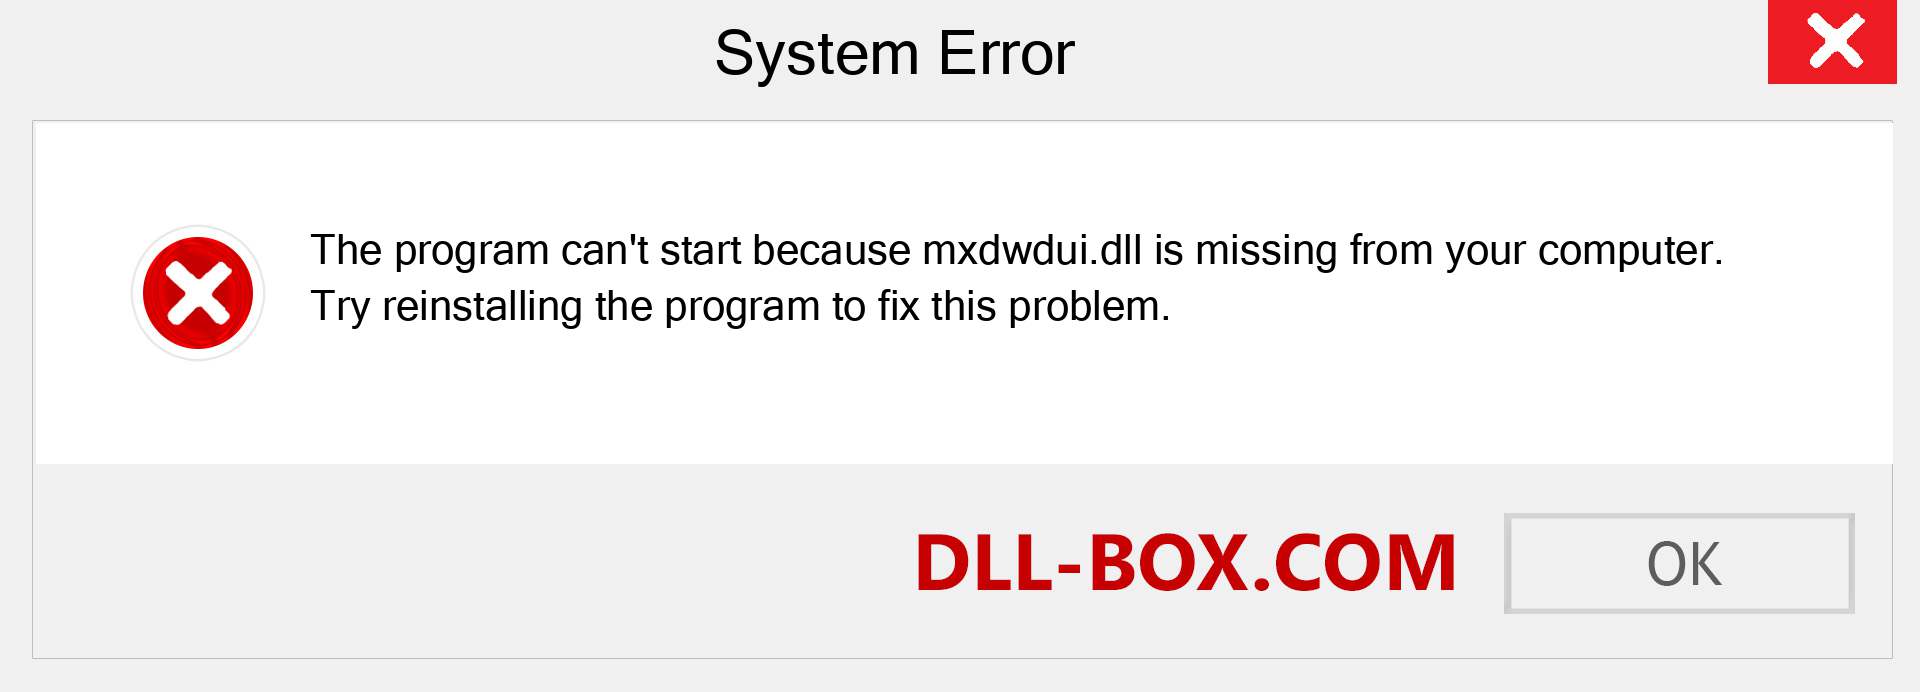  mxdwdui.dll file is missing?. Download for Windows 7, 8, 10 - Fix  mxdwdui dll Missing Error on Windows, photos, images